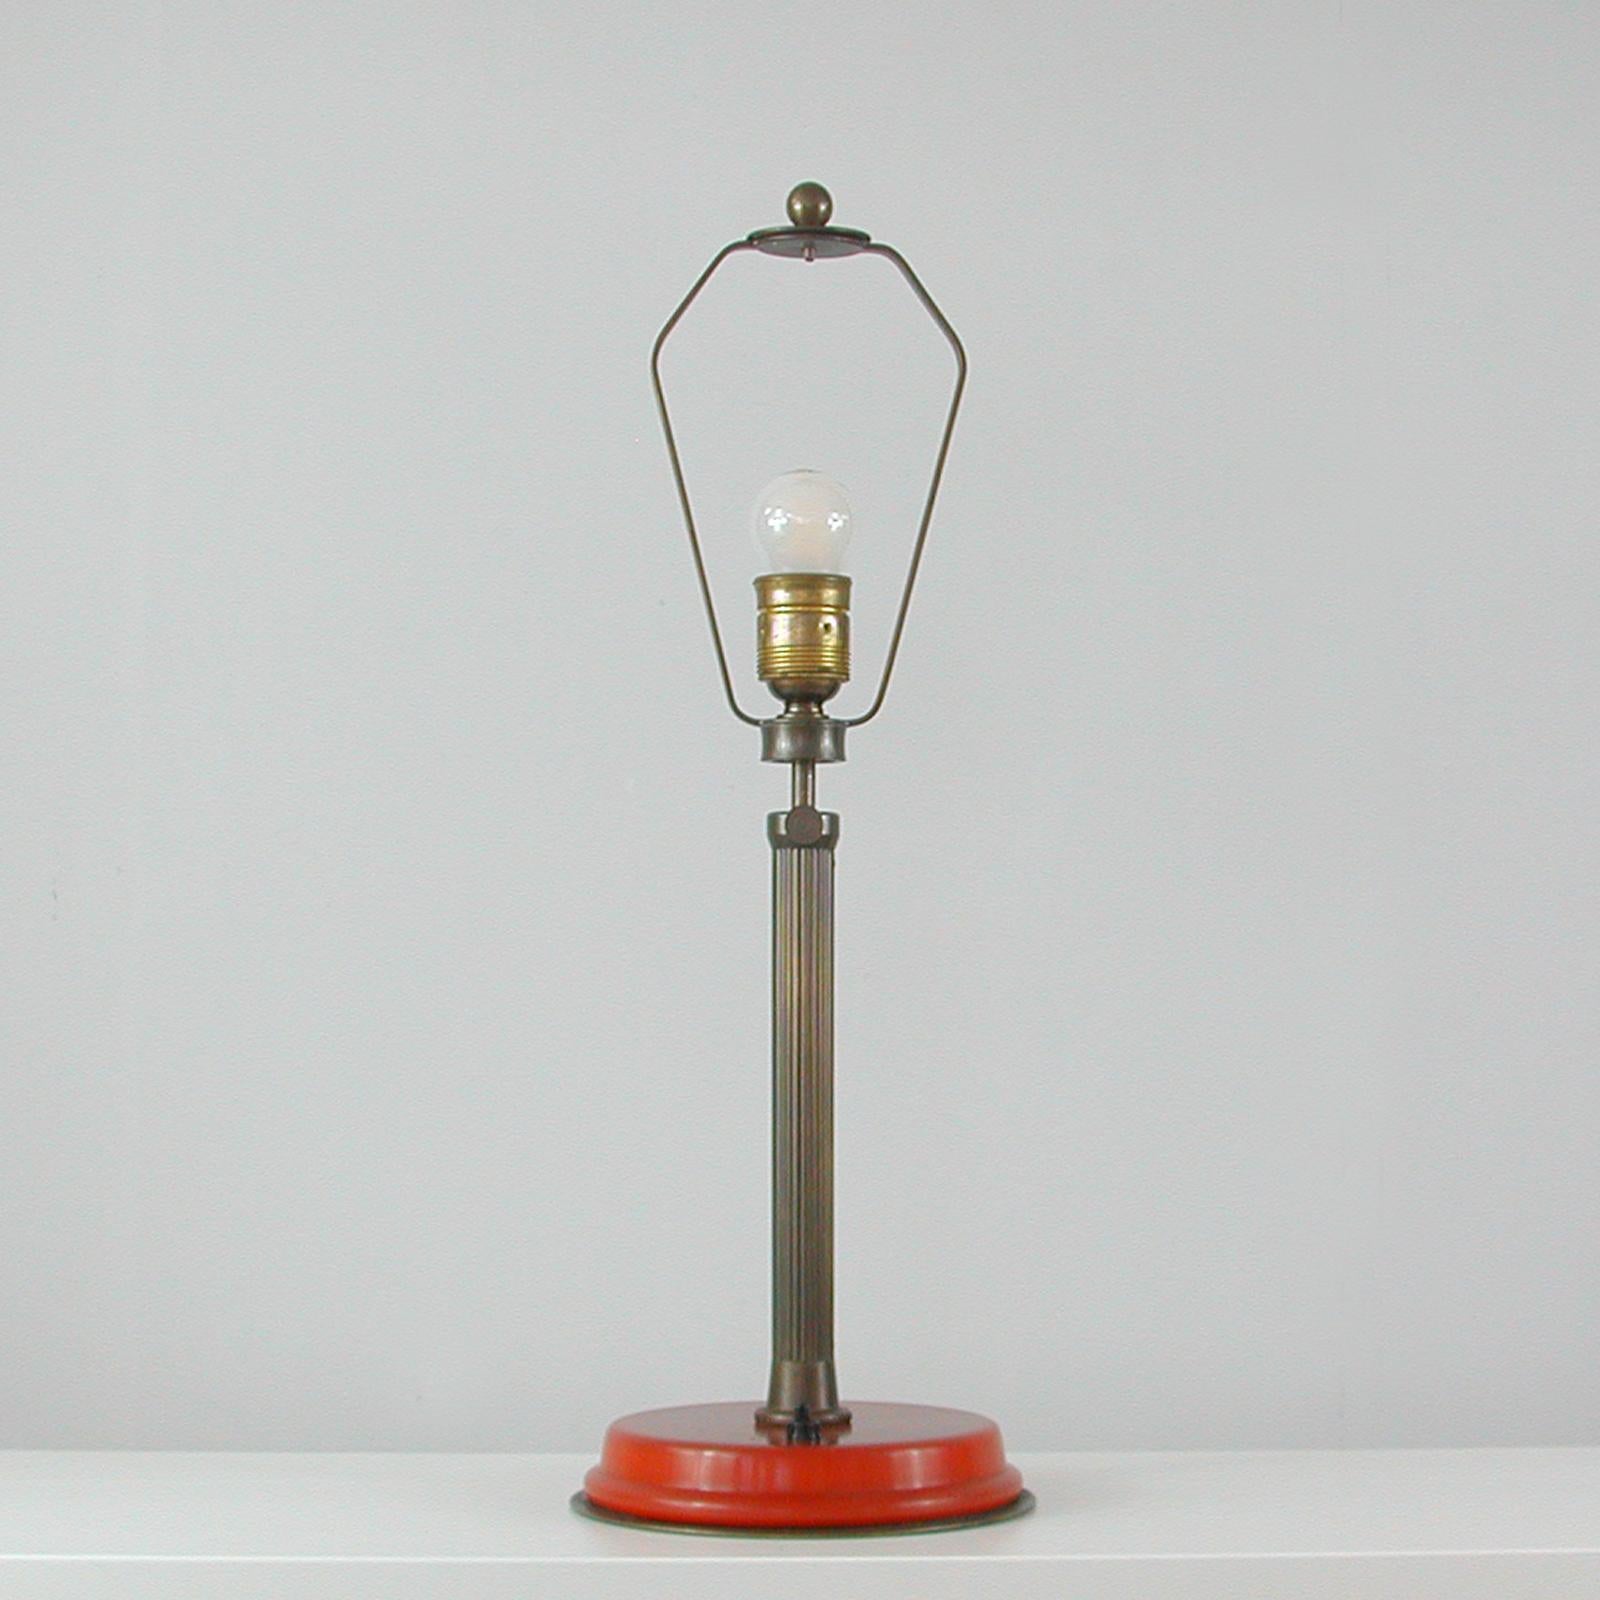 This unusual Art Deco table lamp was designed and manufactured in Germany in the 1920s to 1930s. It features a height adjustable bronzed brass body on red / ruby / crimson colored bakelite base. Very heavy quality.

The light is adjustable from